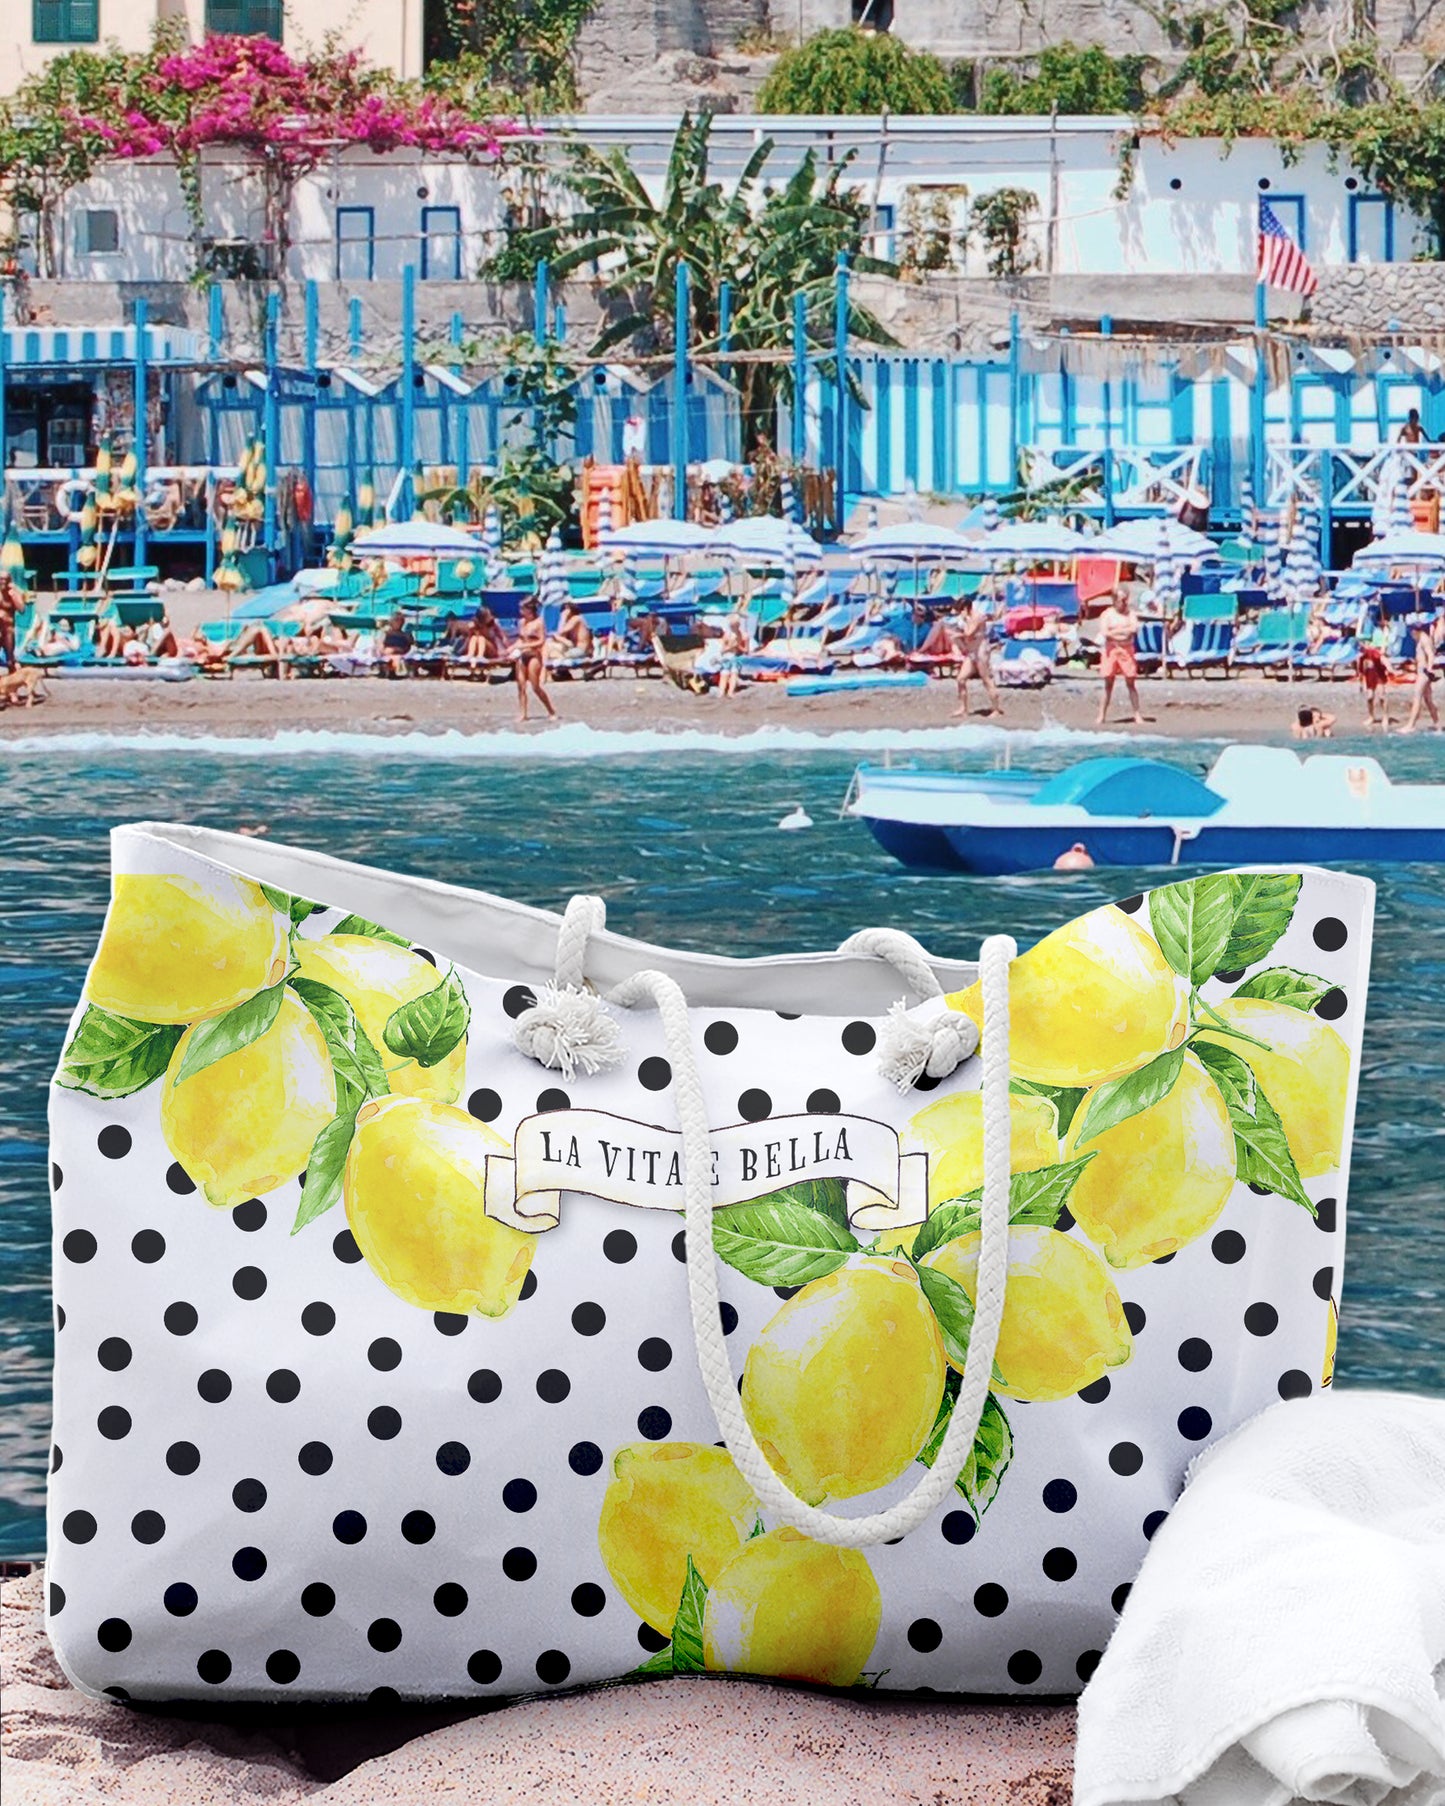 Italy inspired large beach bag with a white background and black polka dots. Big Sorrento lemons on two sides and the writing La vita 'e bella on a scroll in the middle of the bag. Designed by Italian Summers